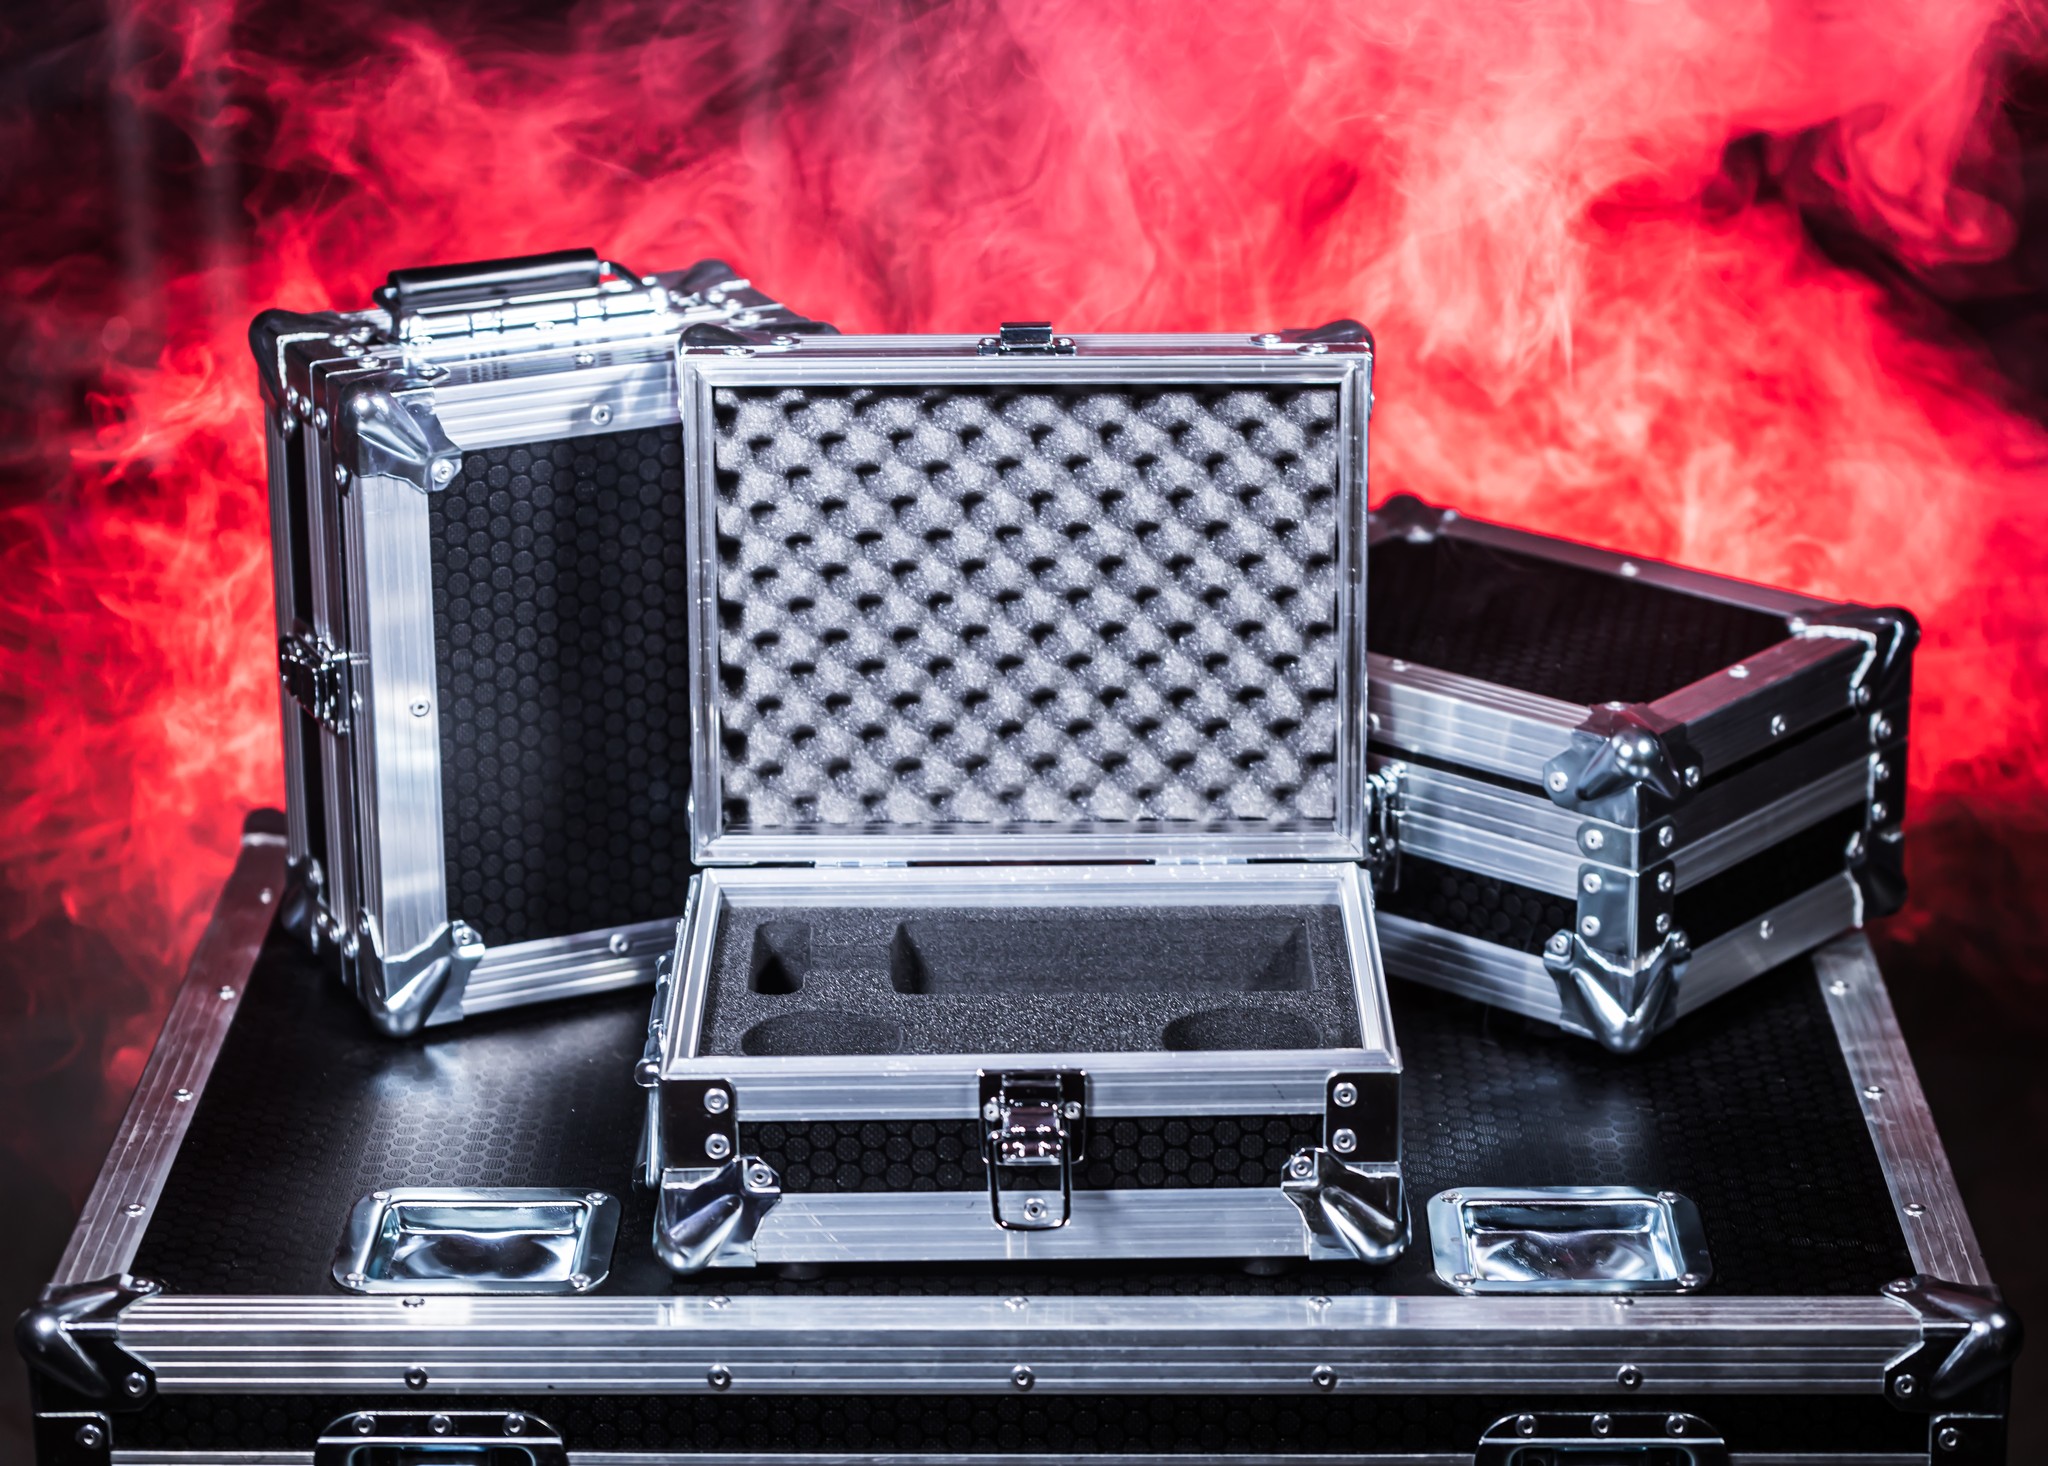 Viking Pro promo image of the flight cases they manufacture